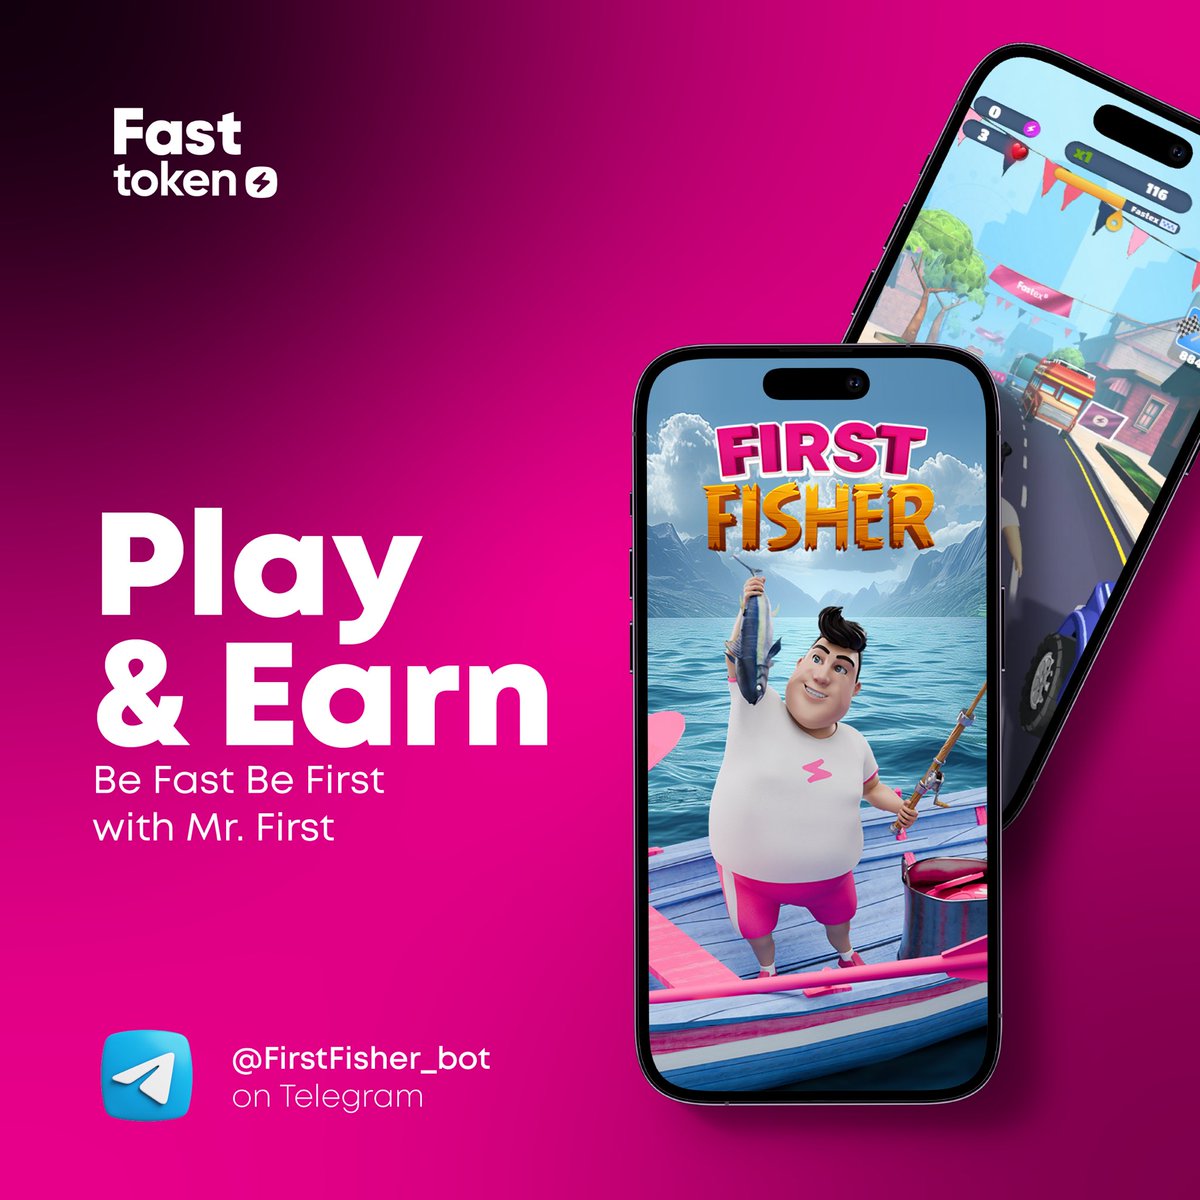 Just Imagine, you earn FTN when you play! Have your portion of fun with First Run and First Fisher. The links of the games to download and join👇 👉t.me/FirstFisher_bo… 👉apps.apple.com/us/app/first-r… 👉play.google.com/store/apps/det… #fasttoken #ftn #firstrun #firstfisher